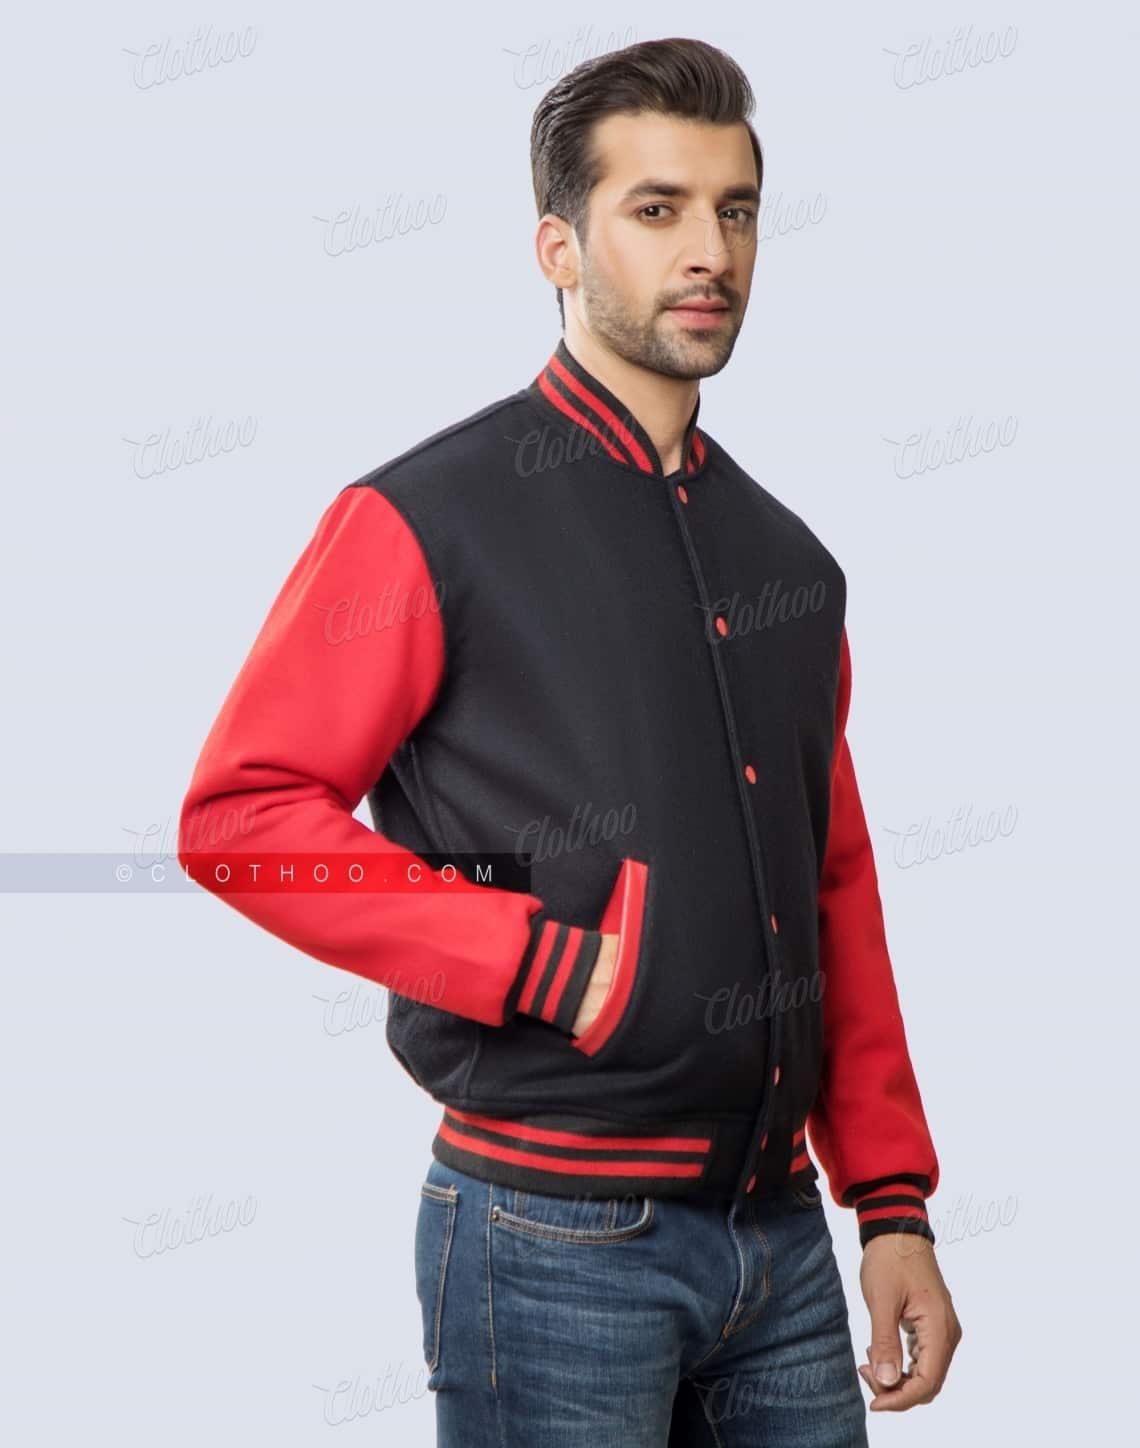 Custom Letterman Jacket in Red and Black | Clothoo